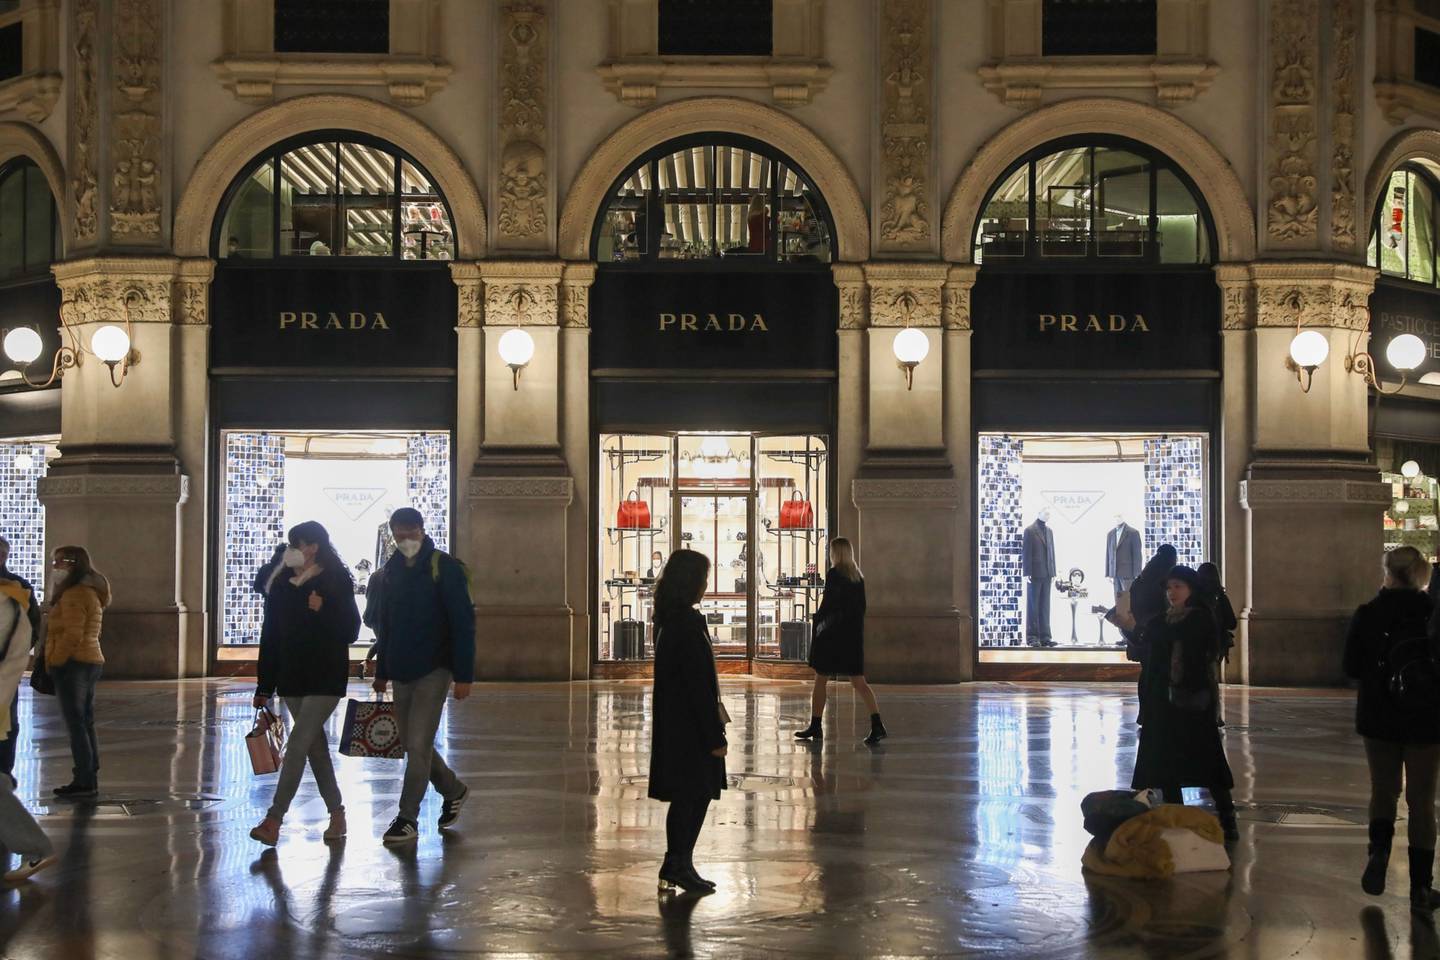 Prada raised $2.1 billion in 2011 by listing a 20% stake in Hong Kong at a time when large luxury brands were flocking to the Asian market to cater to their largest customer base.